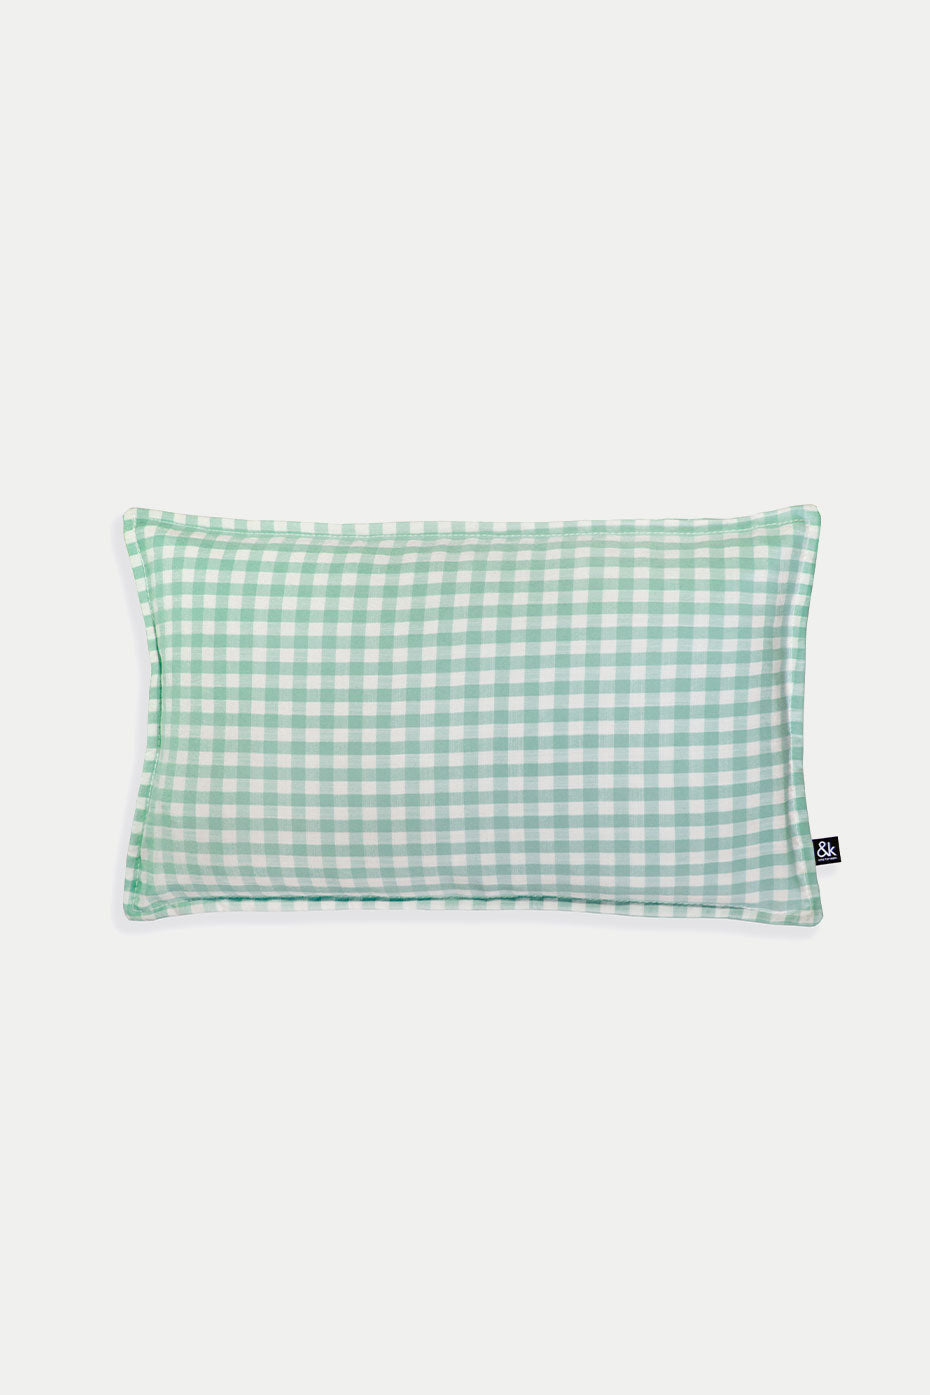 &klevering Green Rectangle Gingham Cushion